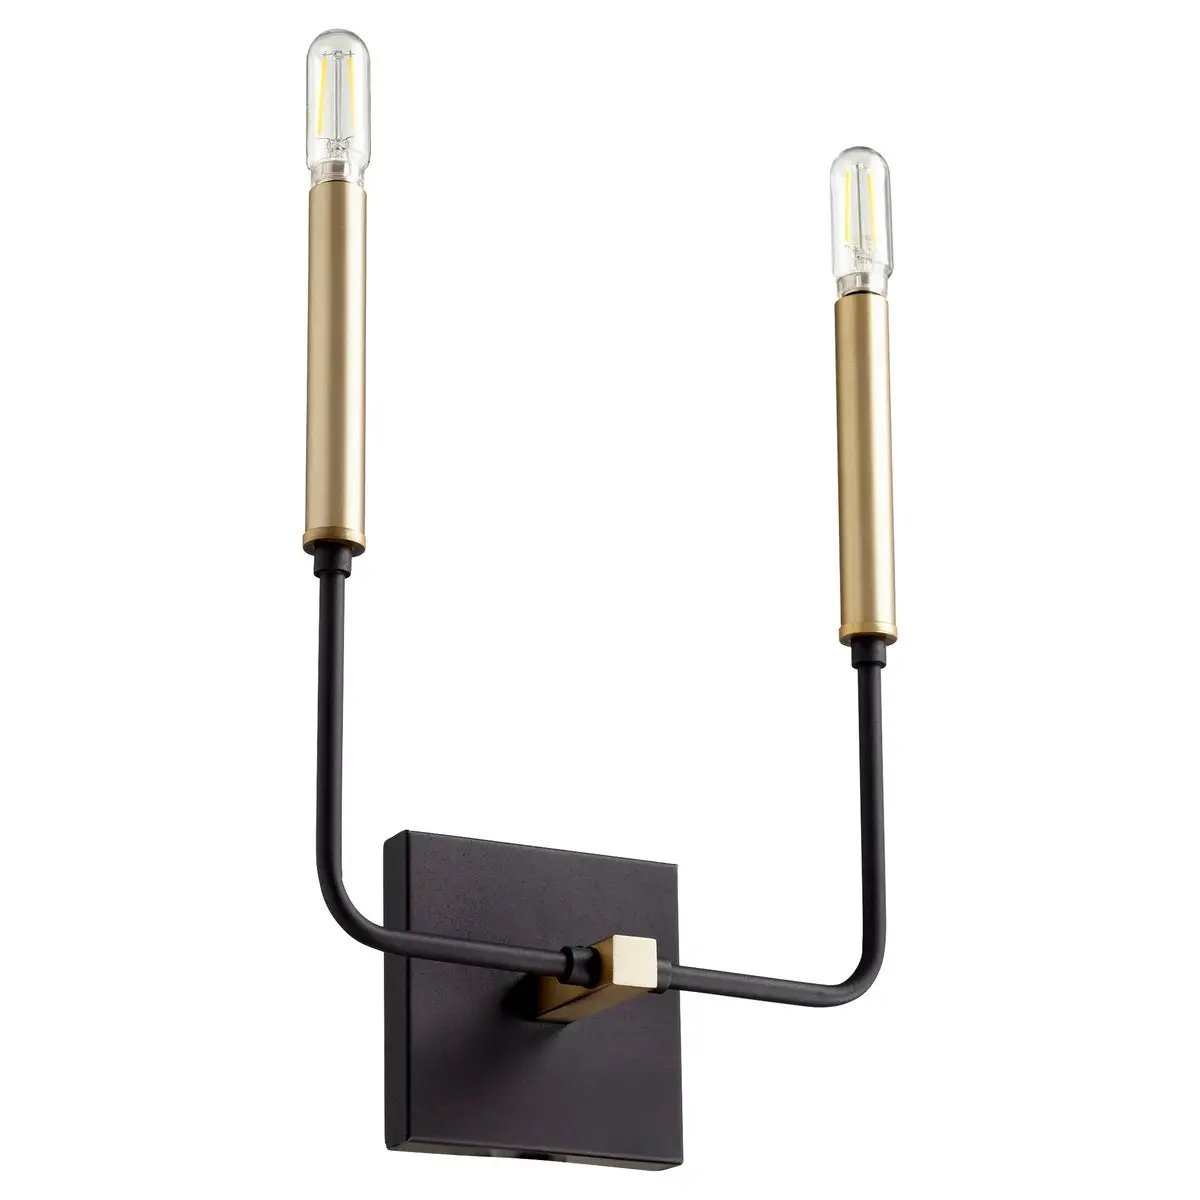 Contemporary Wall Sconce with black and gold geometric design, featuring eight candelabra light sources. Suitable for indoor and outdoor spaces.